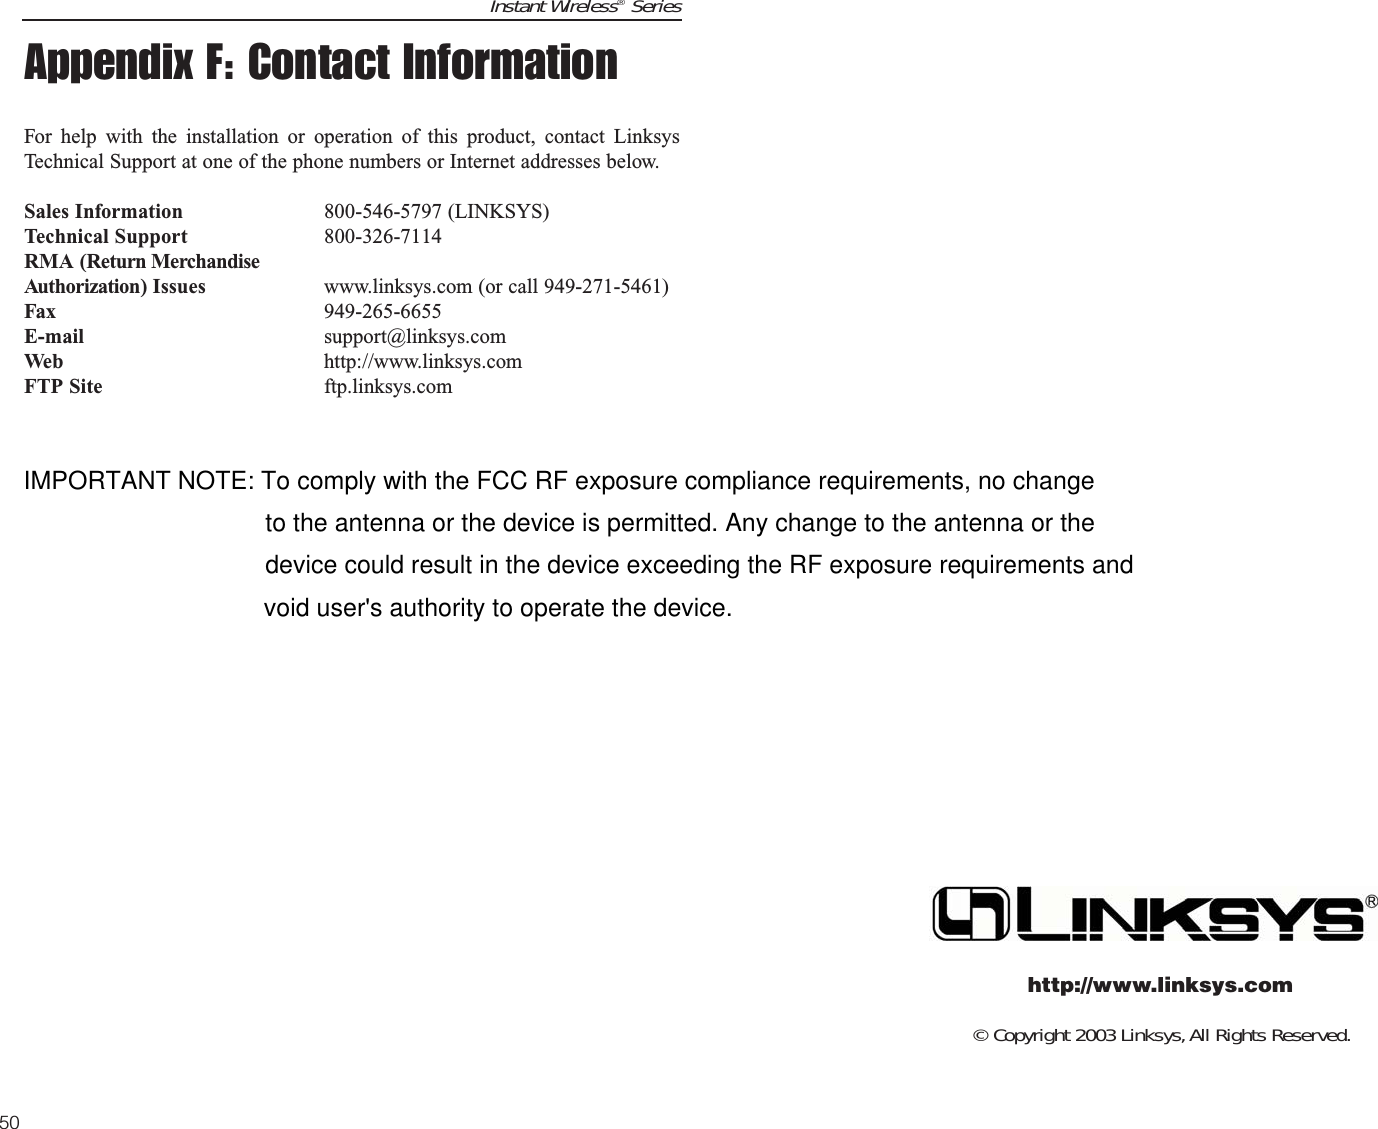 © Copyright 2003 Linksys,All Rights Reserved.http://www.linksys.comInstant Wireless®Series50Appendix F: Contact InformationFor help with the installation or operation of this product, contact LinksysTechnical Support at one of the phone numbers or Internet addresses below.Sales Information 800-546-5797 (LINKSYS)Technical Support 800-326-7114RMA (Return MerchandiseAuthorization) Issues www.linksys.com (or call 949-271-5461)Fax 949-265-6655E-mail support@linksys.comWeb http://www.linksys.comFTP Site ftp.linksys.comIMPORTANT NOTE: To comply with the FCC RF exposure compliance requirements, no changeto the antenna or the device is permitted. Any change to the antenna or thedevice could result in the device exceeding the RF exposure requirements andvoid user&apos;s authority to operate the device.